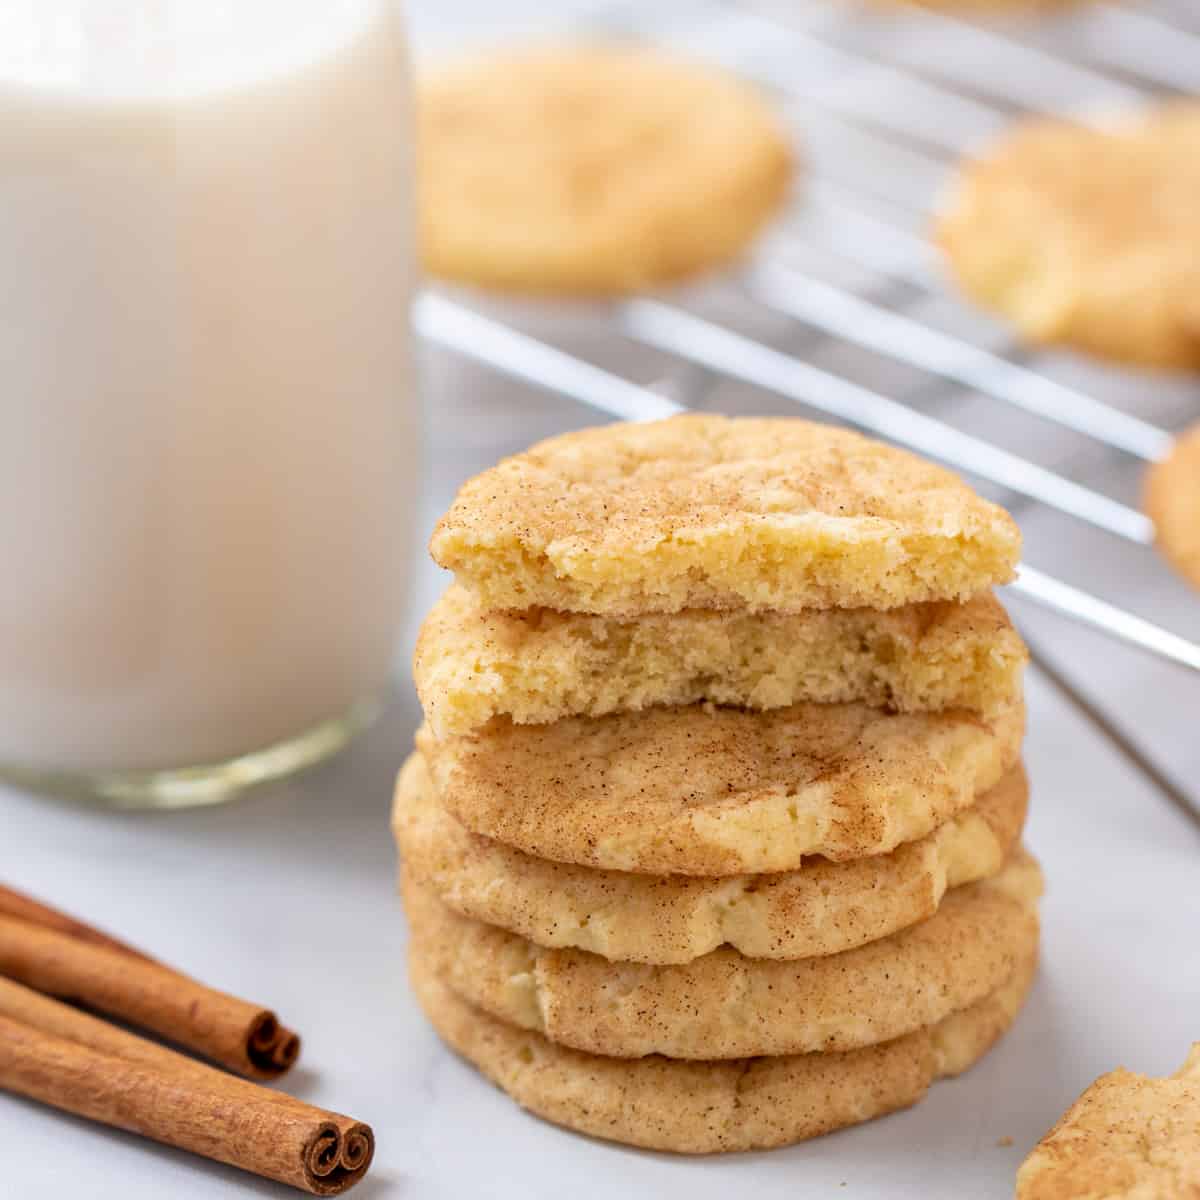 Stack of snickerdoodle cookies next to glass of milk.